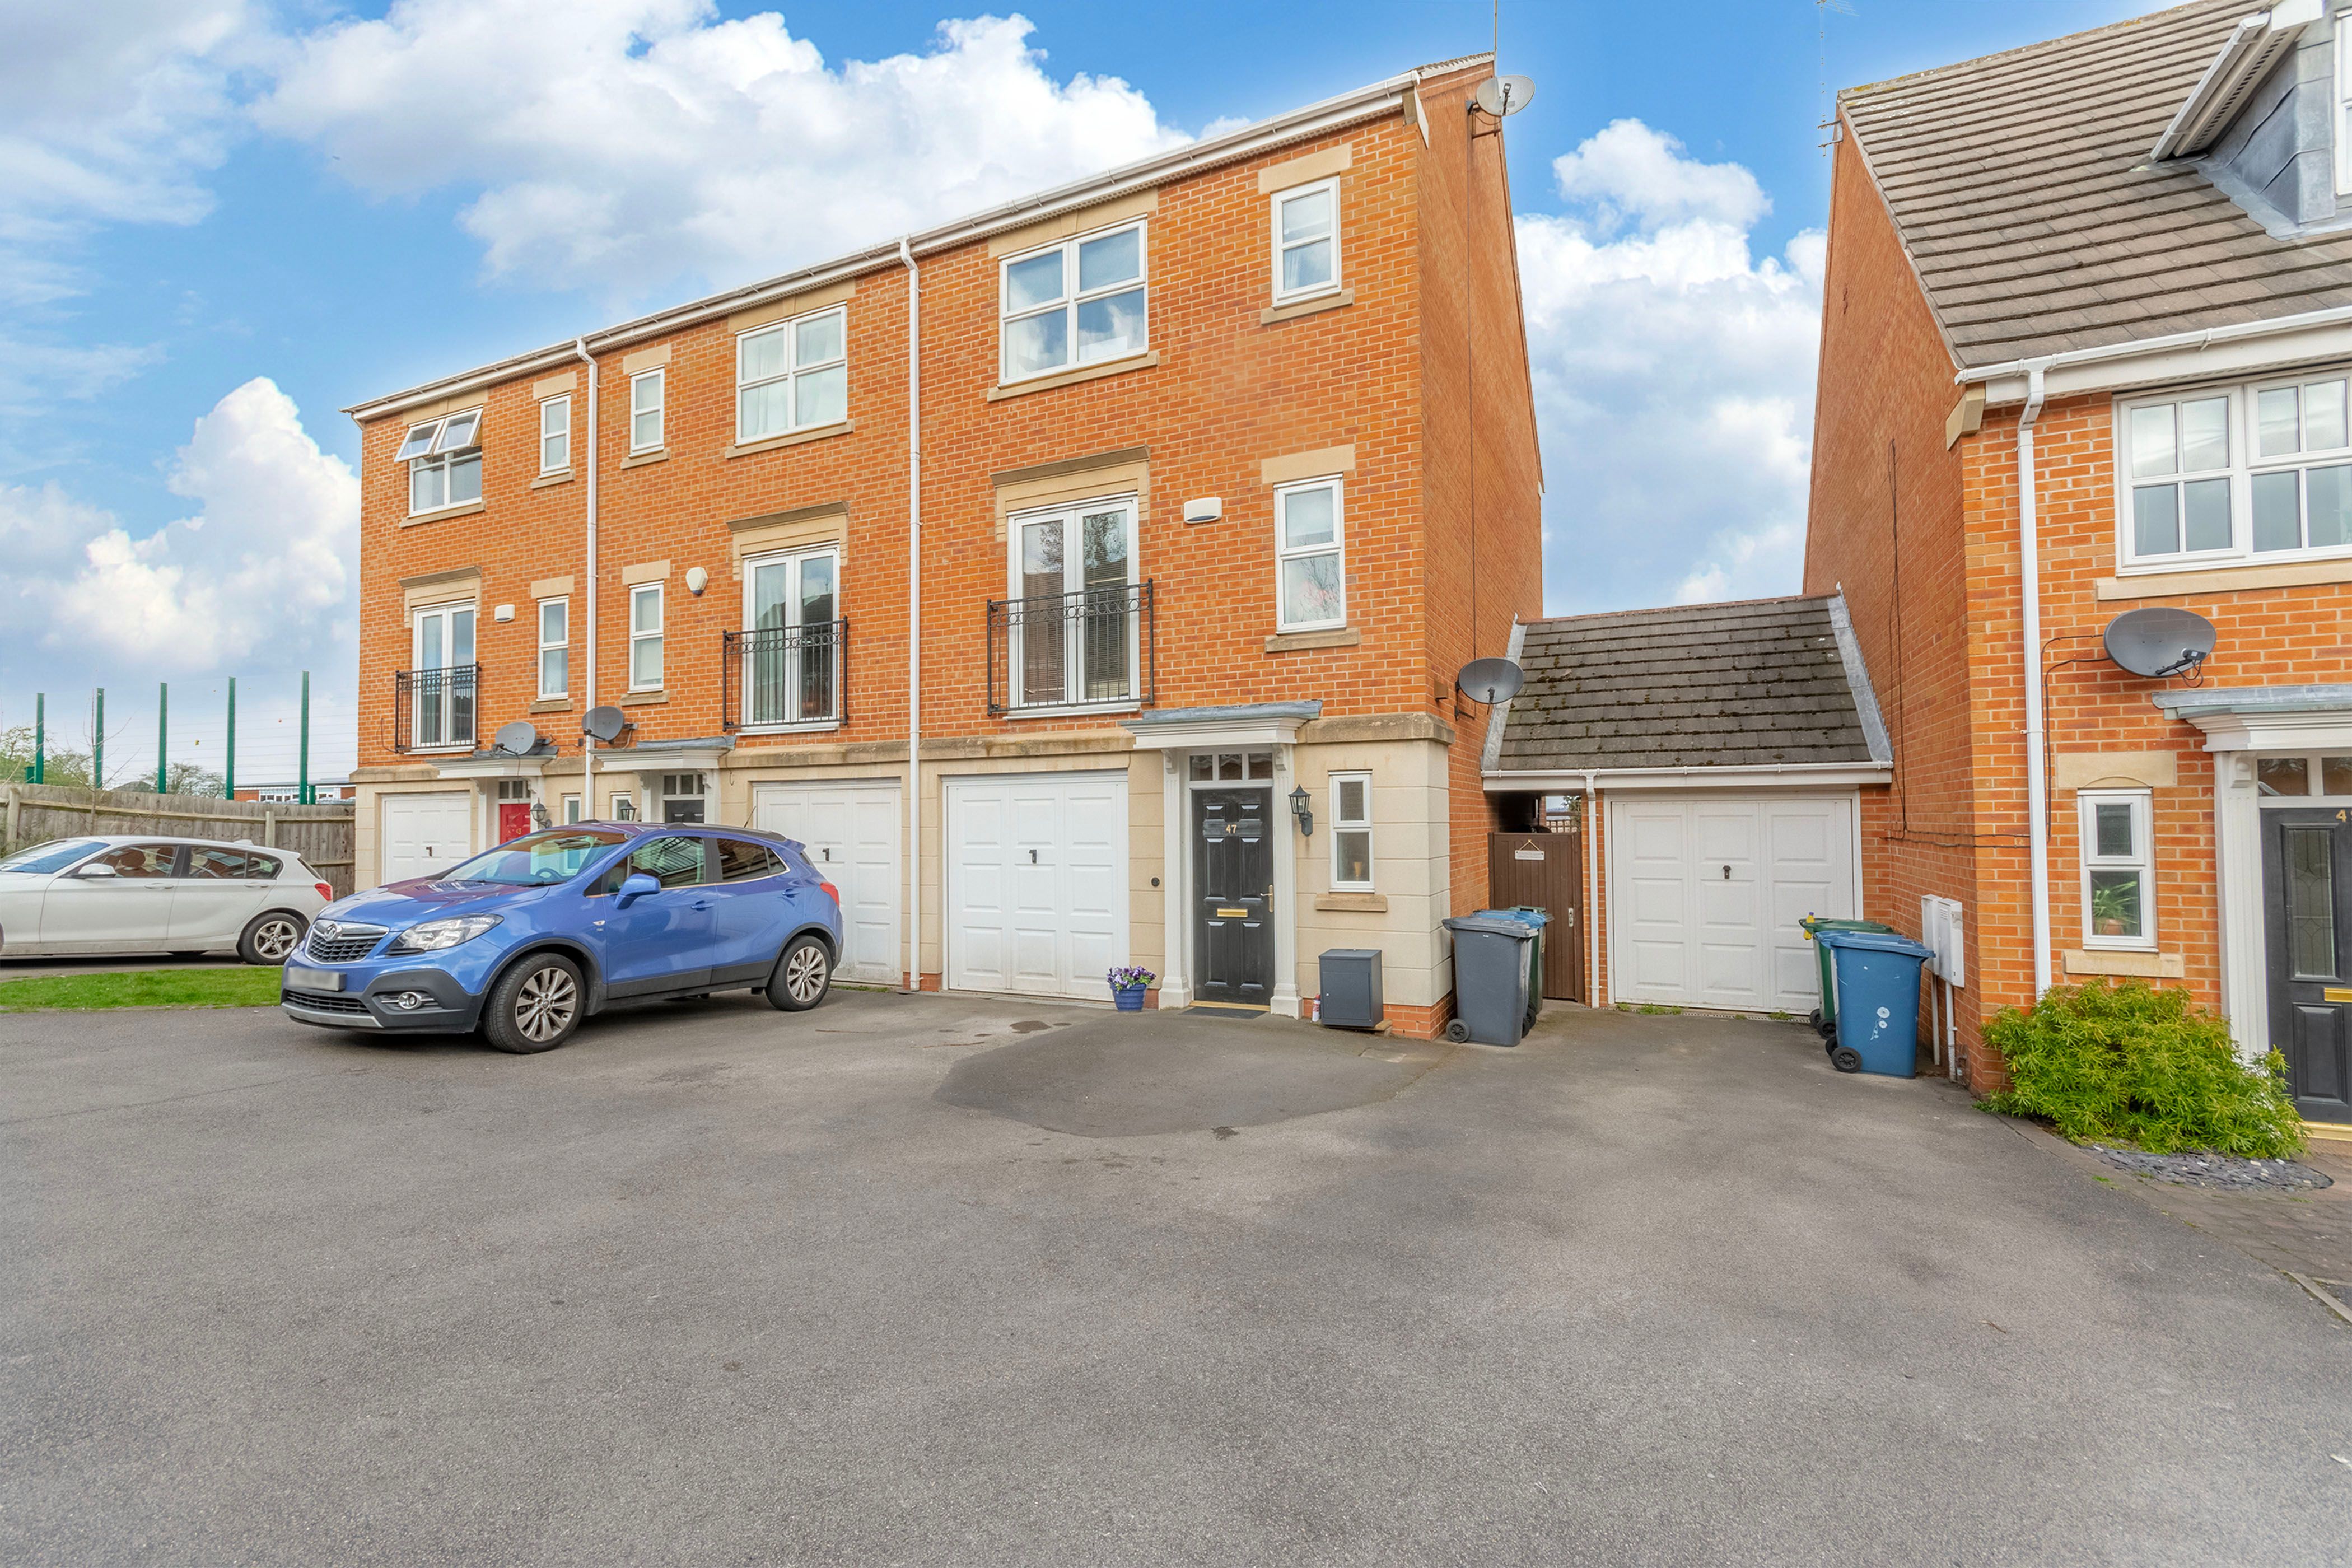 3 bed house for sale in Denton Drive, West Bridgford  - Property Image 1